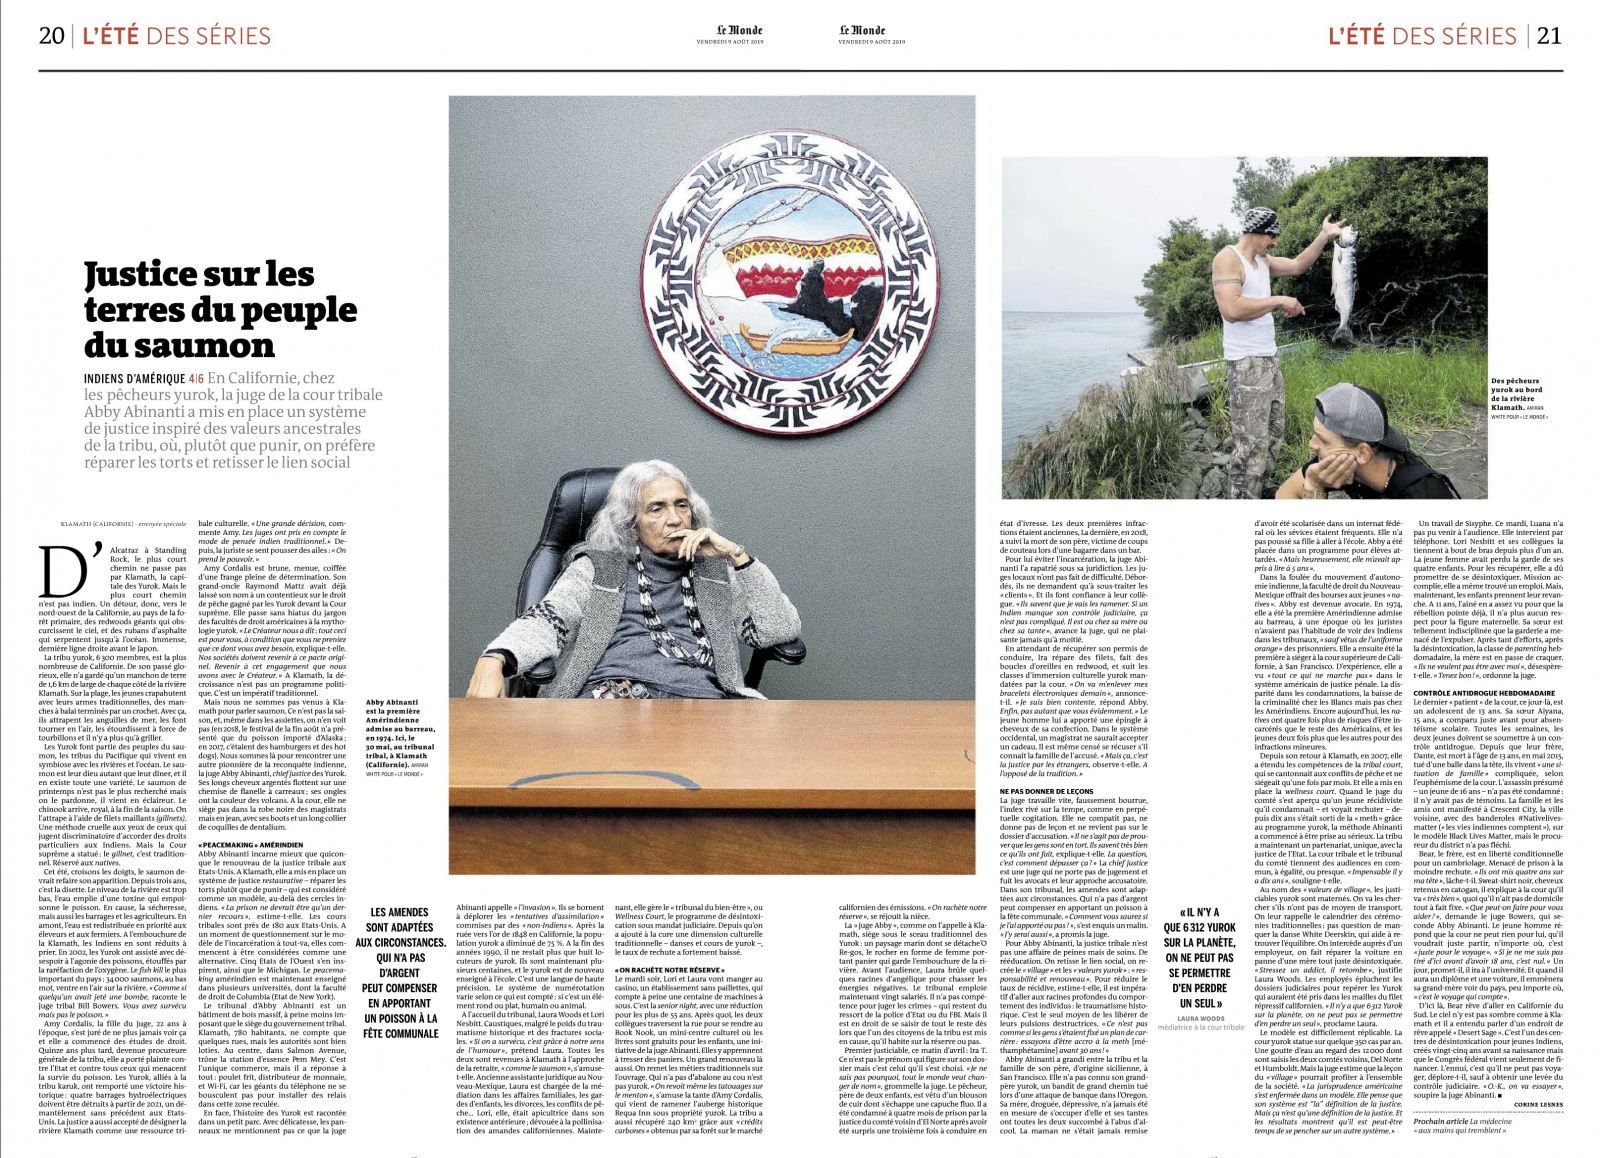 Recent assignment for Le Monde